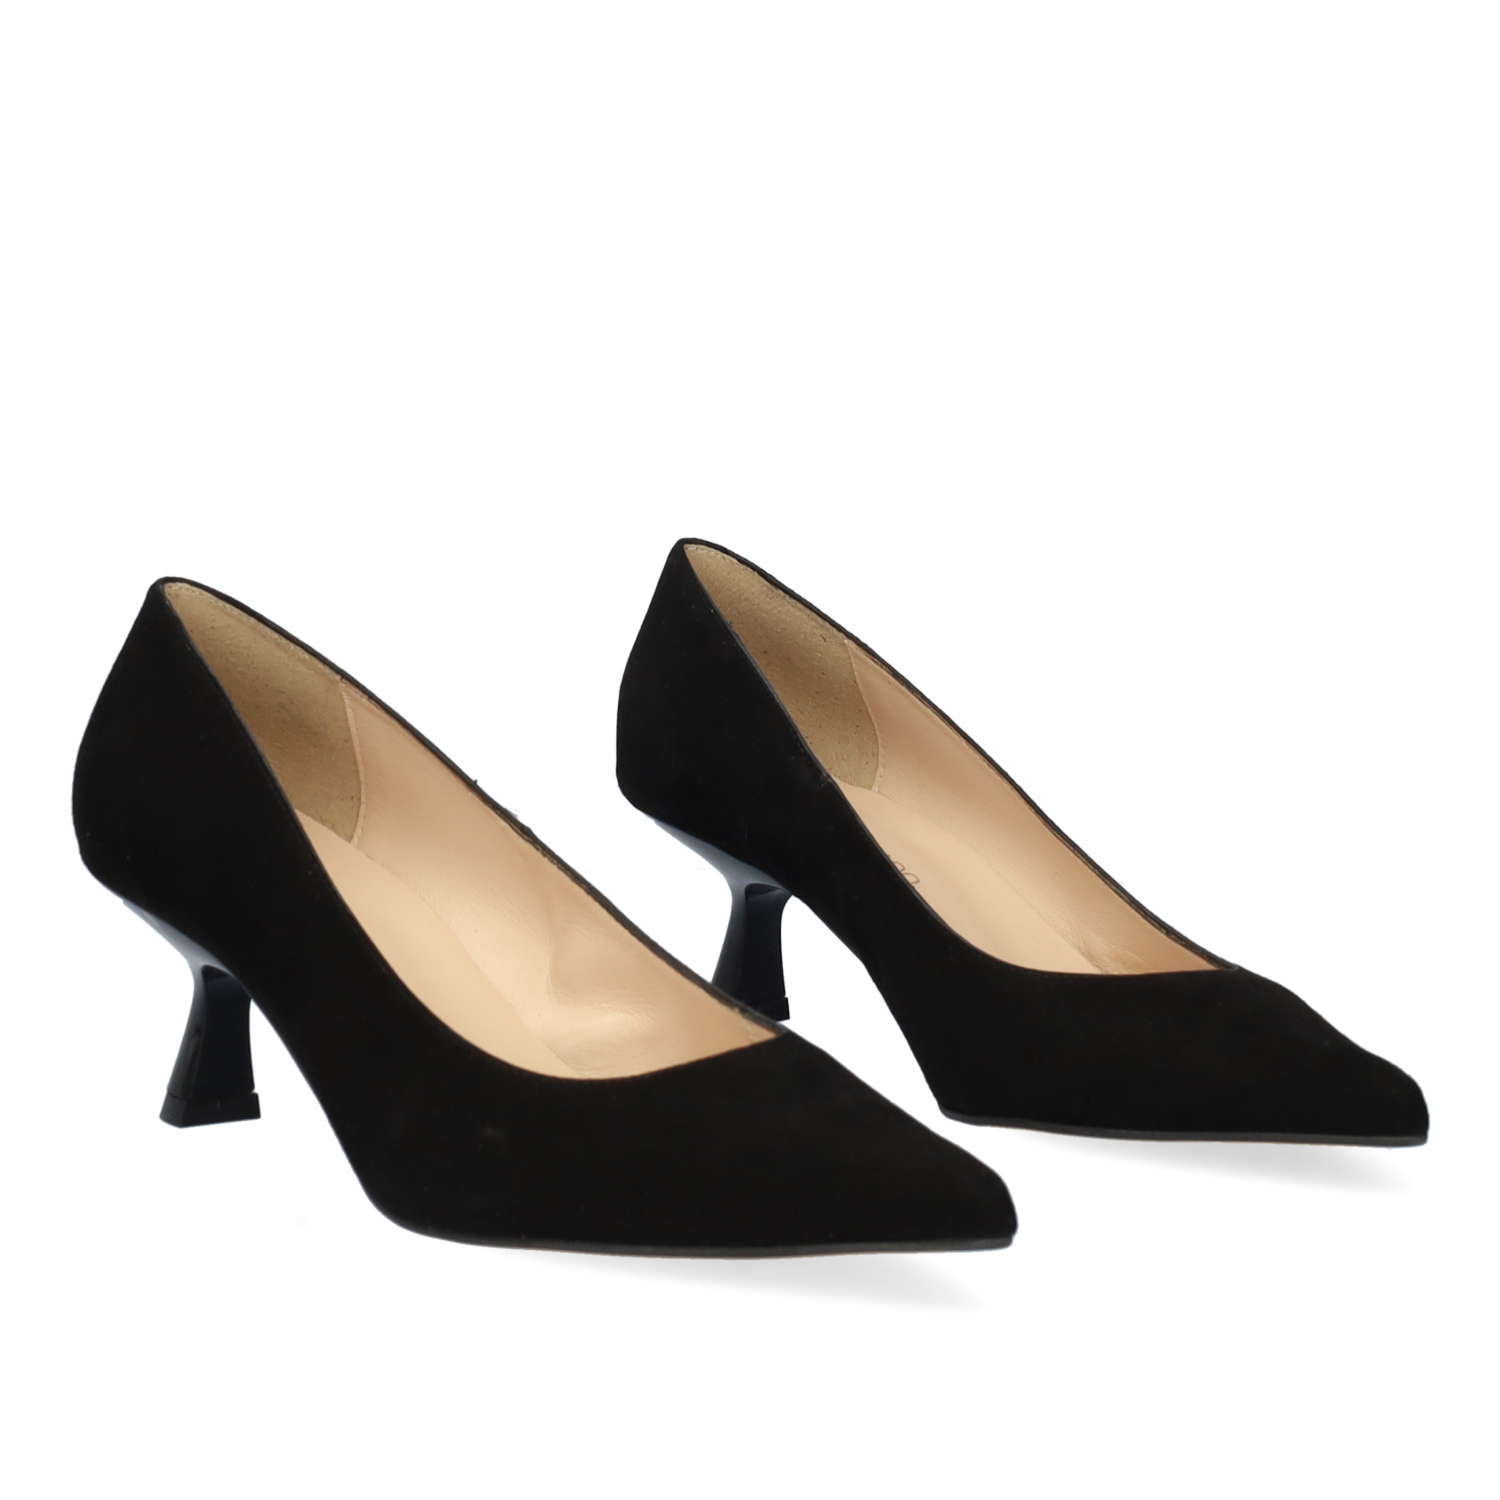 Heeled shoes in black suede 